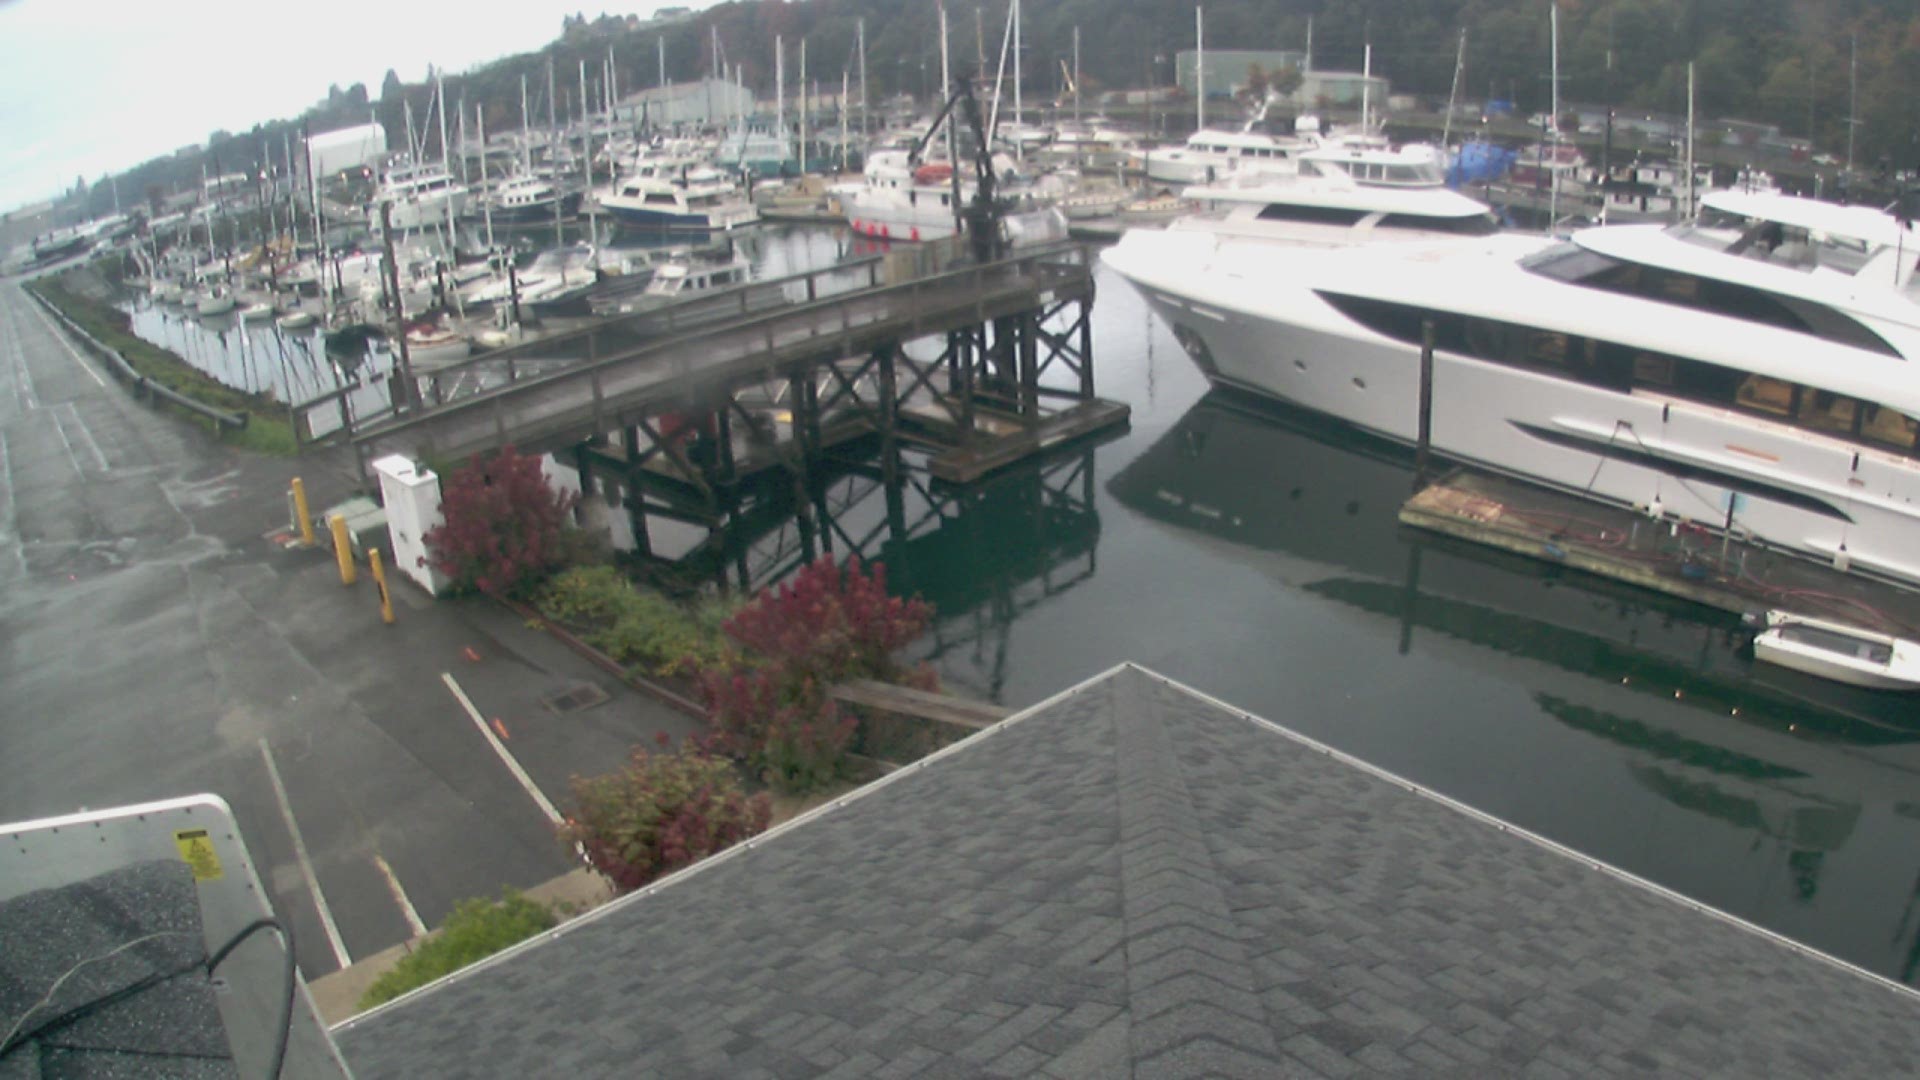 A new 125-foot Westport Yacht slammed into a dock and smaller boats in the Port Angeles Boat Haven on October 7, 2019. No injuries. Alcohol and drugs not suspected.